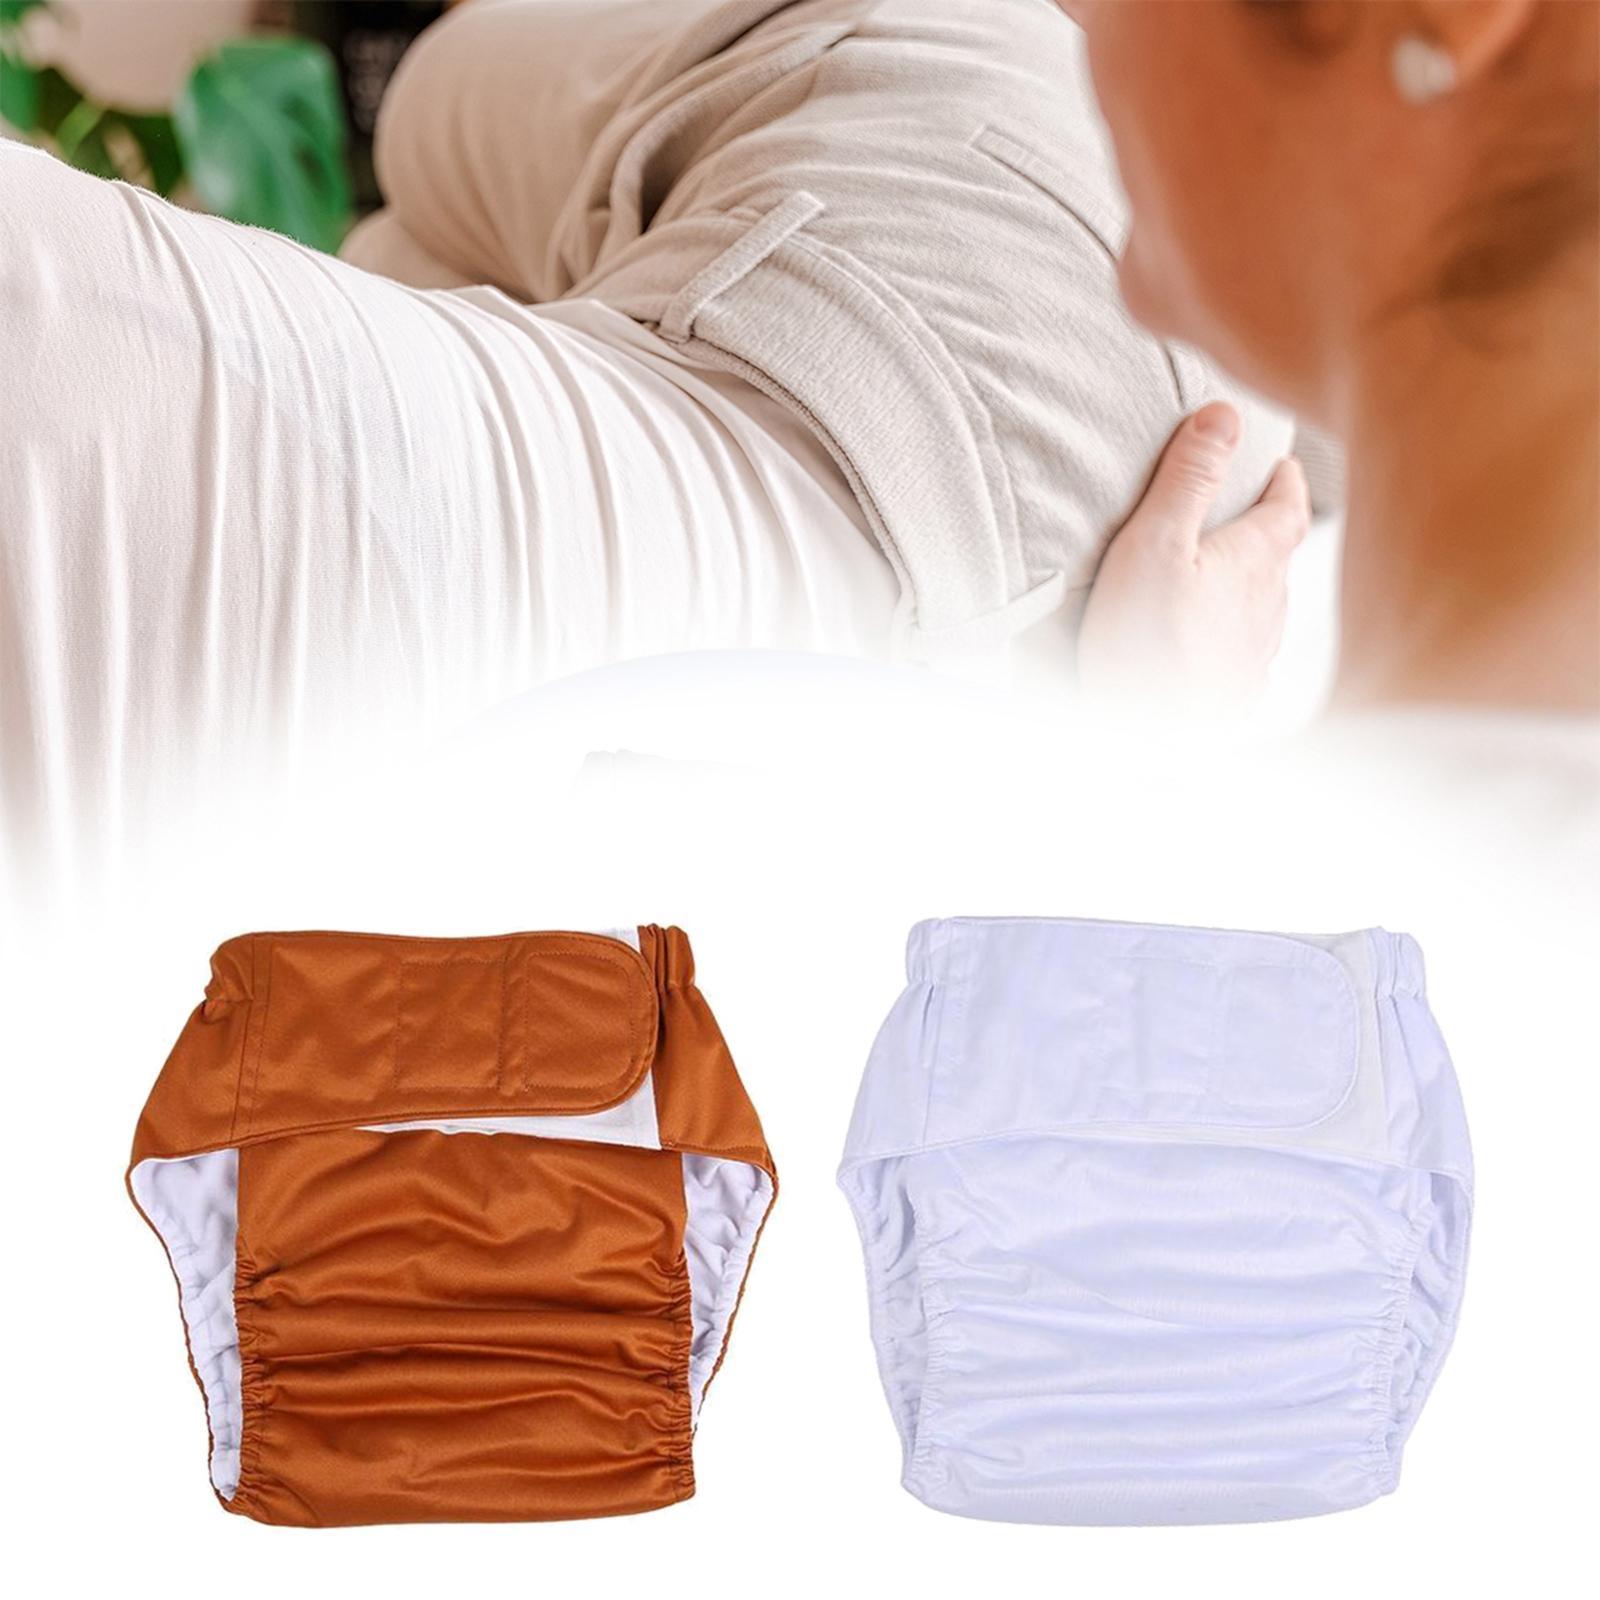 2x Reusable Adult Cloth Diaper Washable Nappy for Men Women Breathable